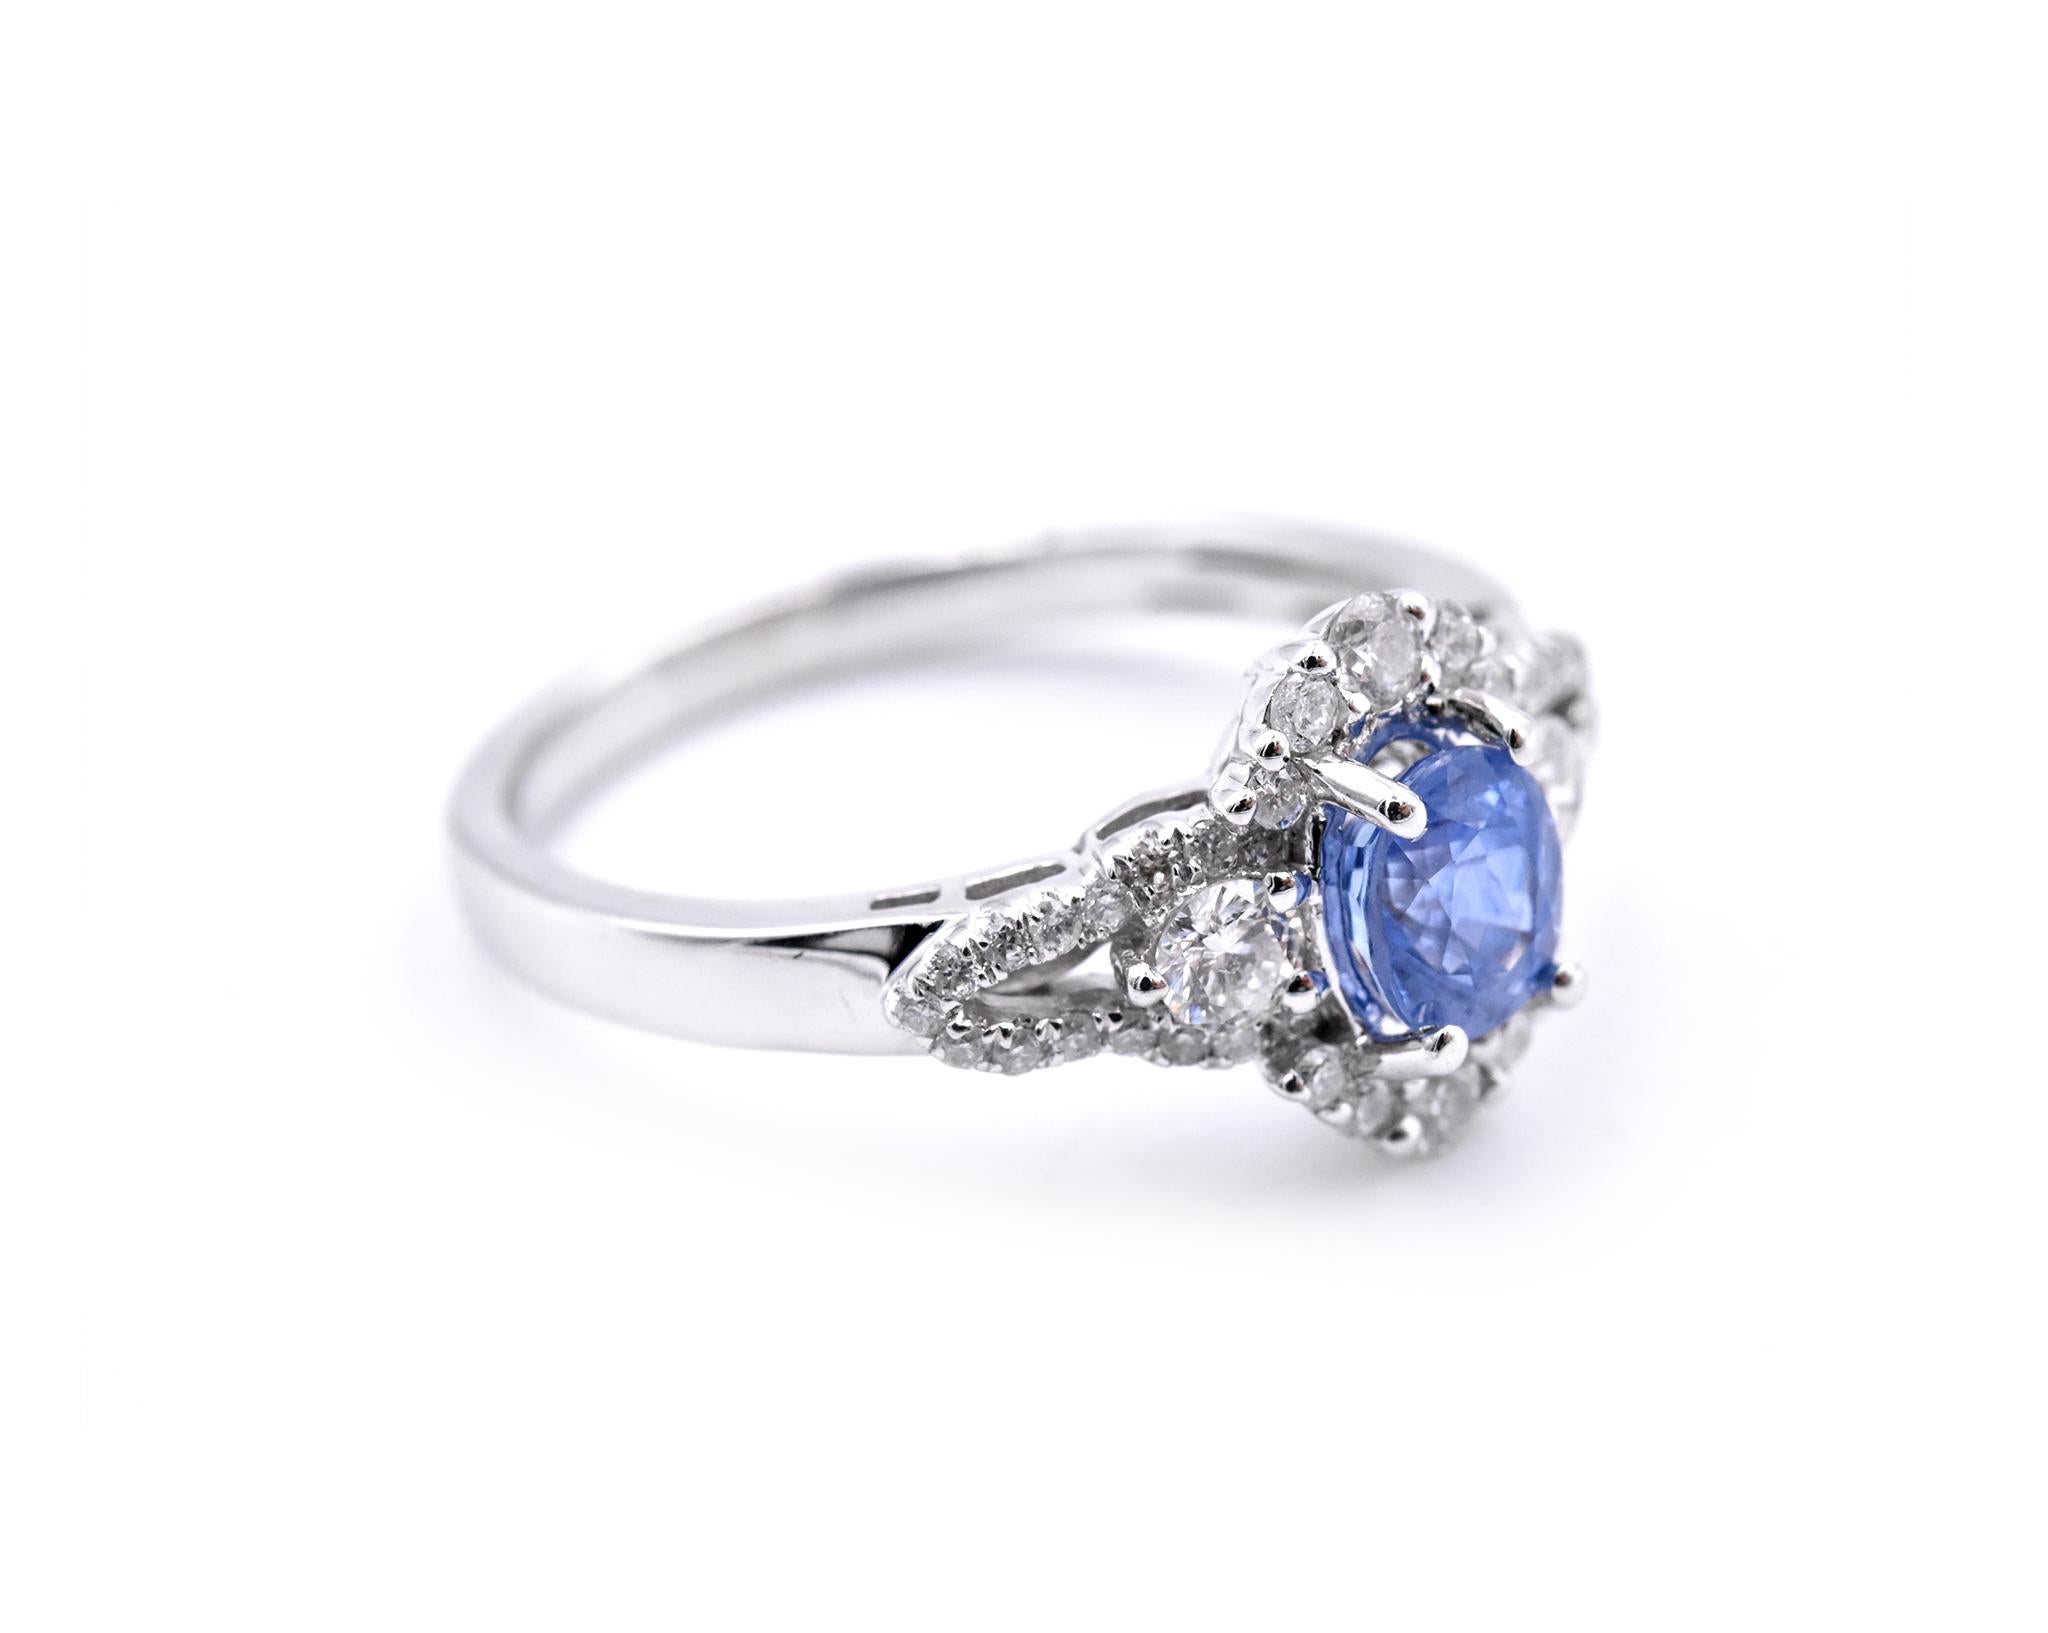 Material: 14k white gold
Gemstones: Sapphire = .70ct Oval
Certification: AGI 25324
Diamonds: 42 round brilliant cuts = .52cttw
Color: F
Clarity: VS2-SI
Ring Size: 7.5 (please allow two additional shipping days for sizing requests)
Dimensions: ring